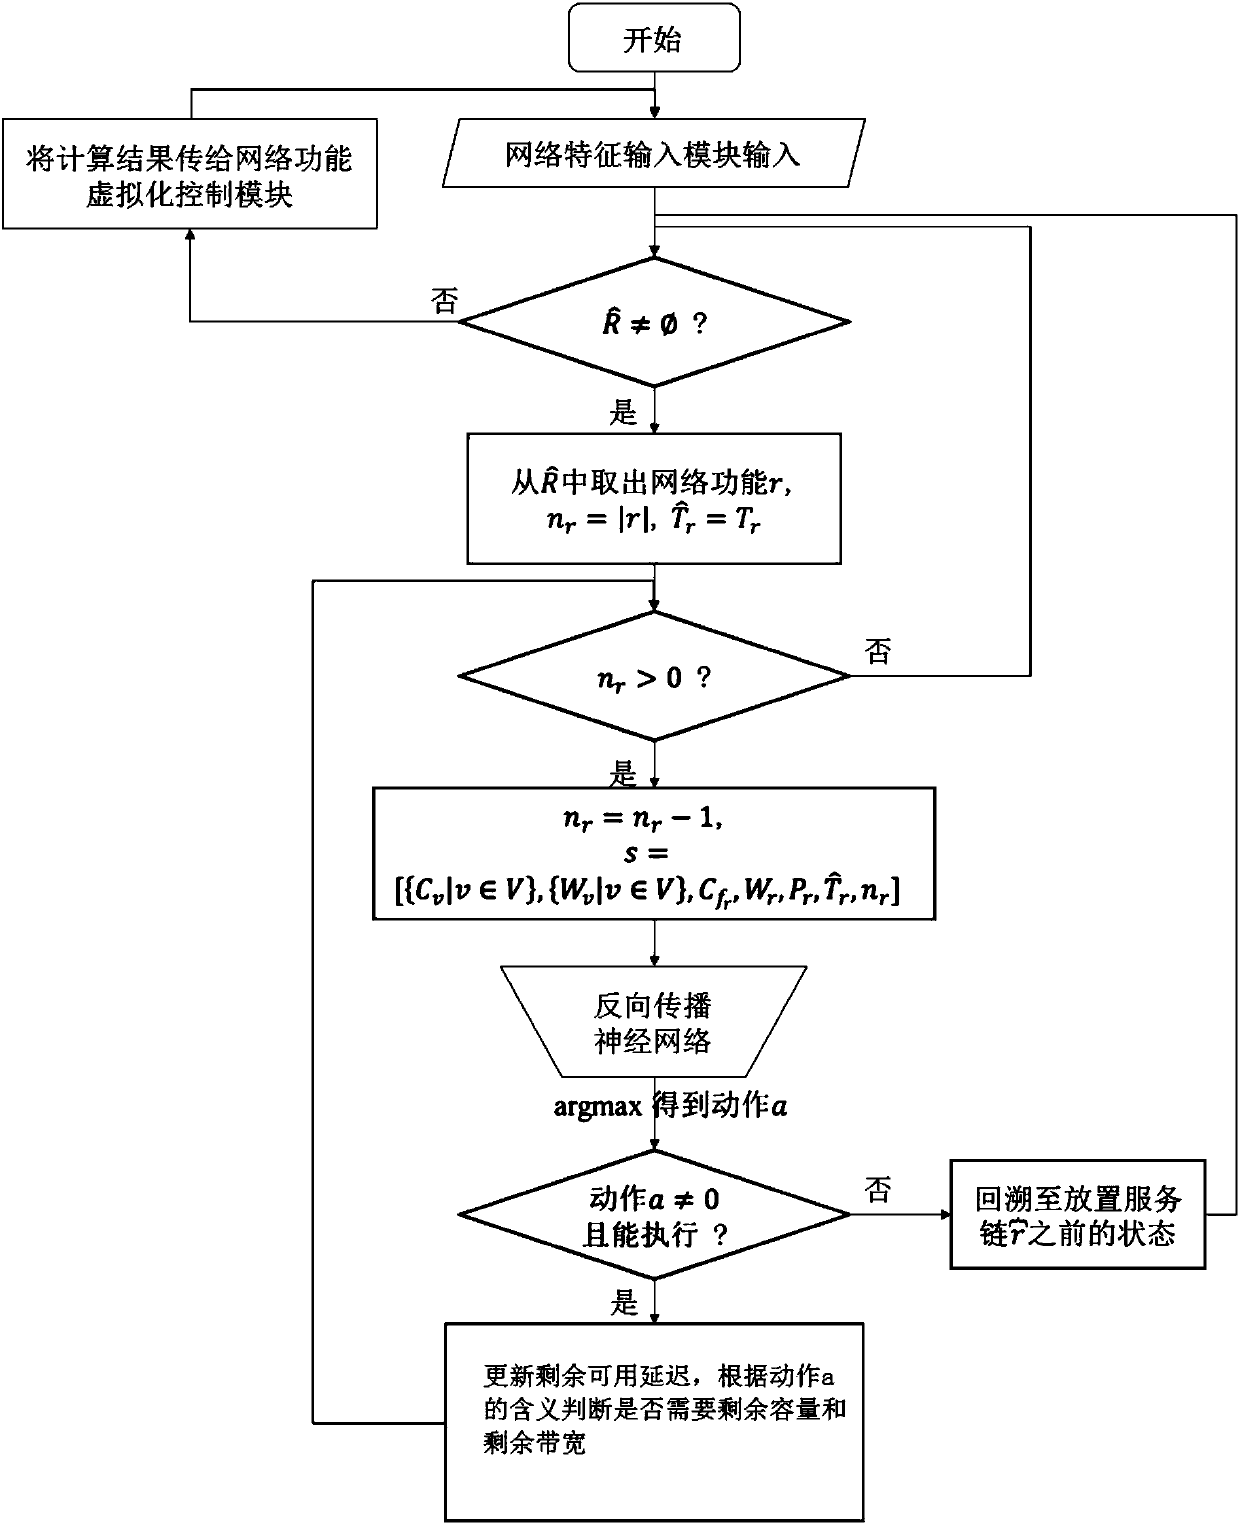 Method and system of scheduling and linking virtual network functions